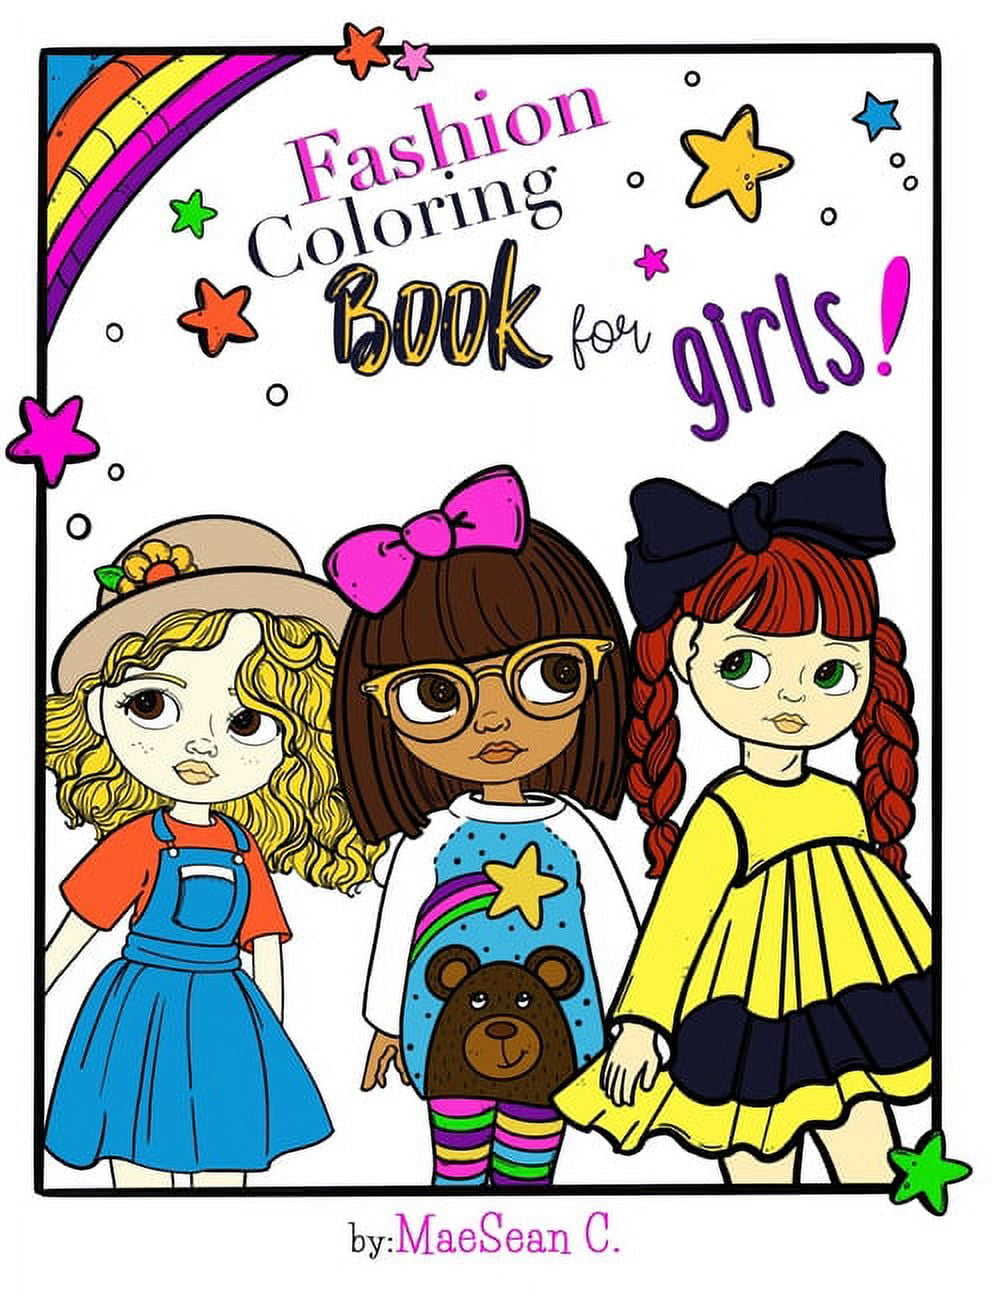 Fashion Coloring Book for Girls by Nalrez Publishing